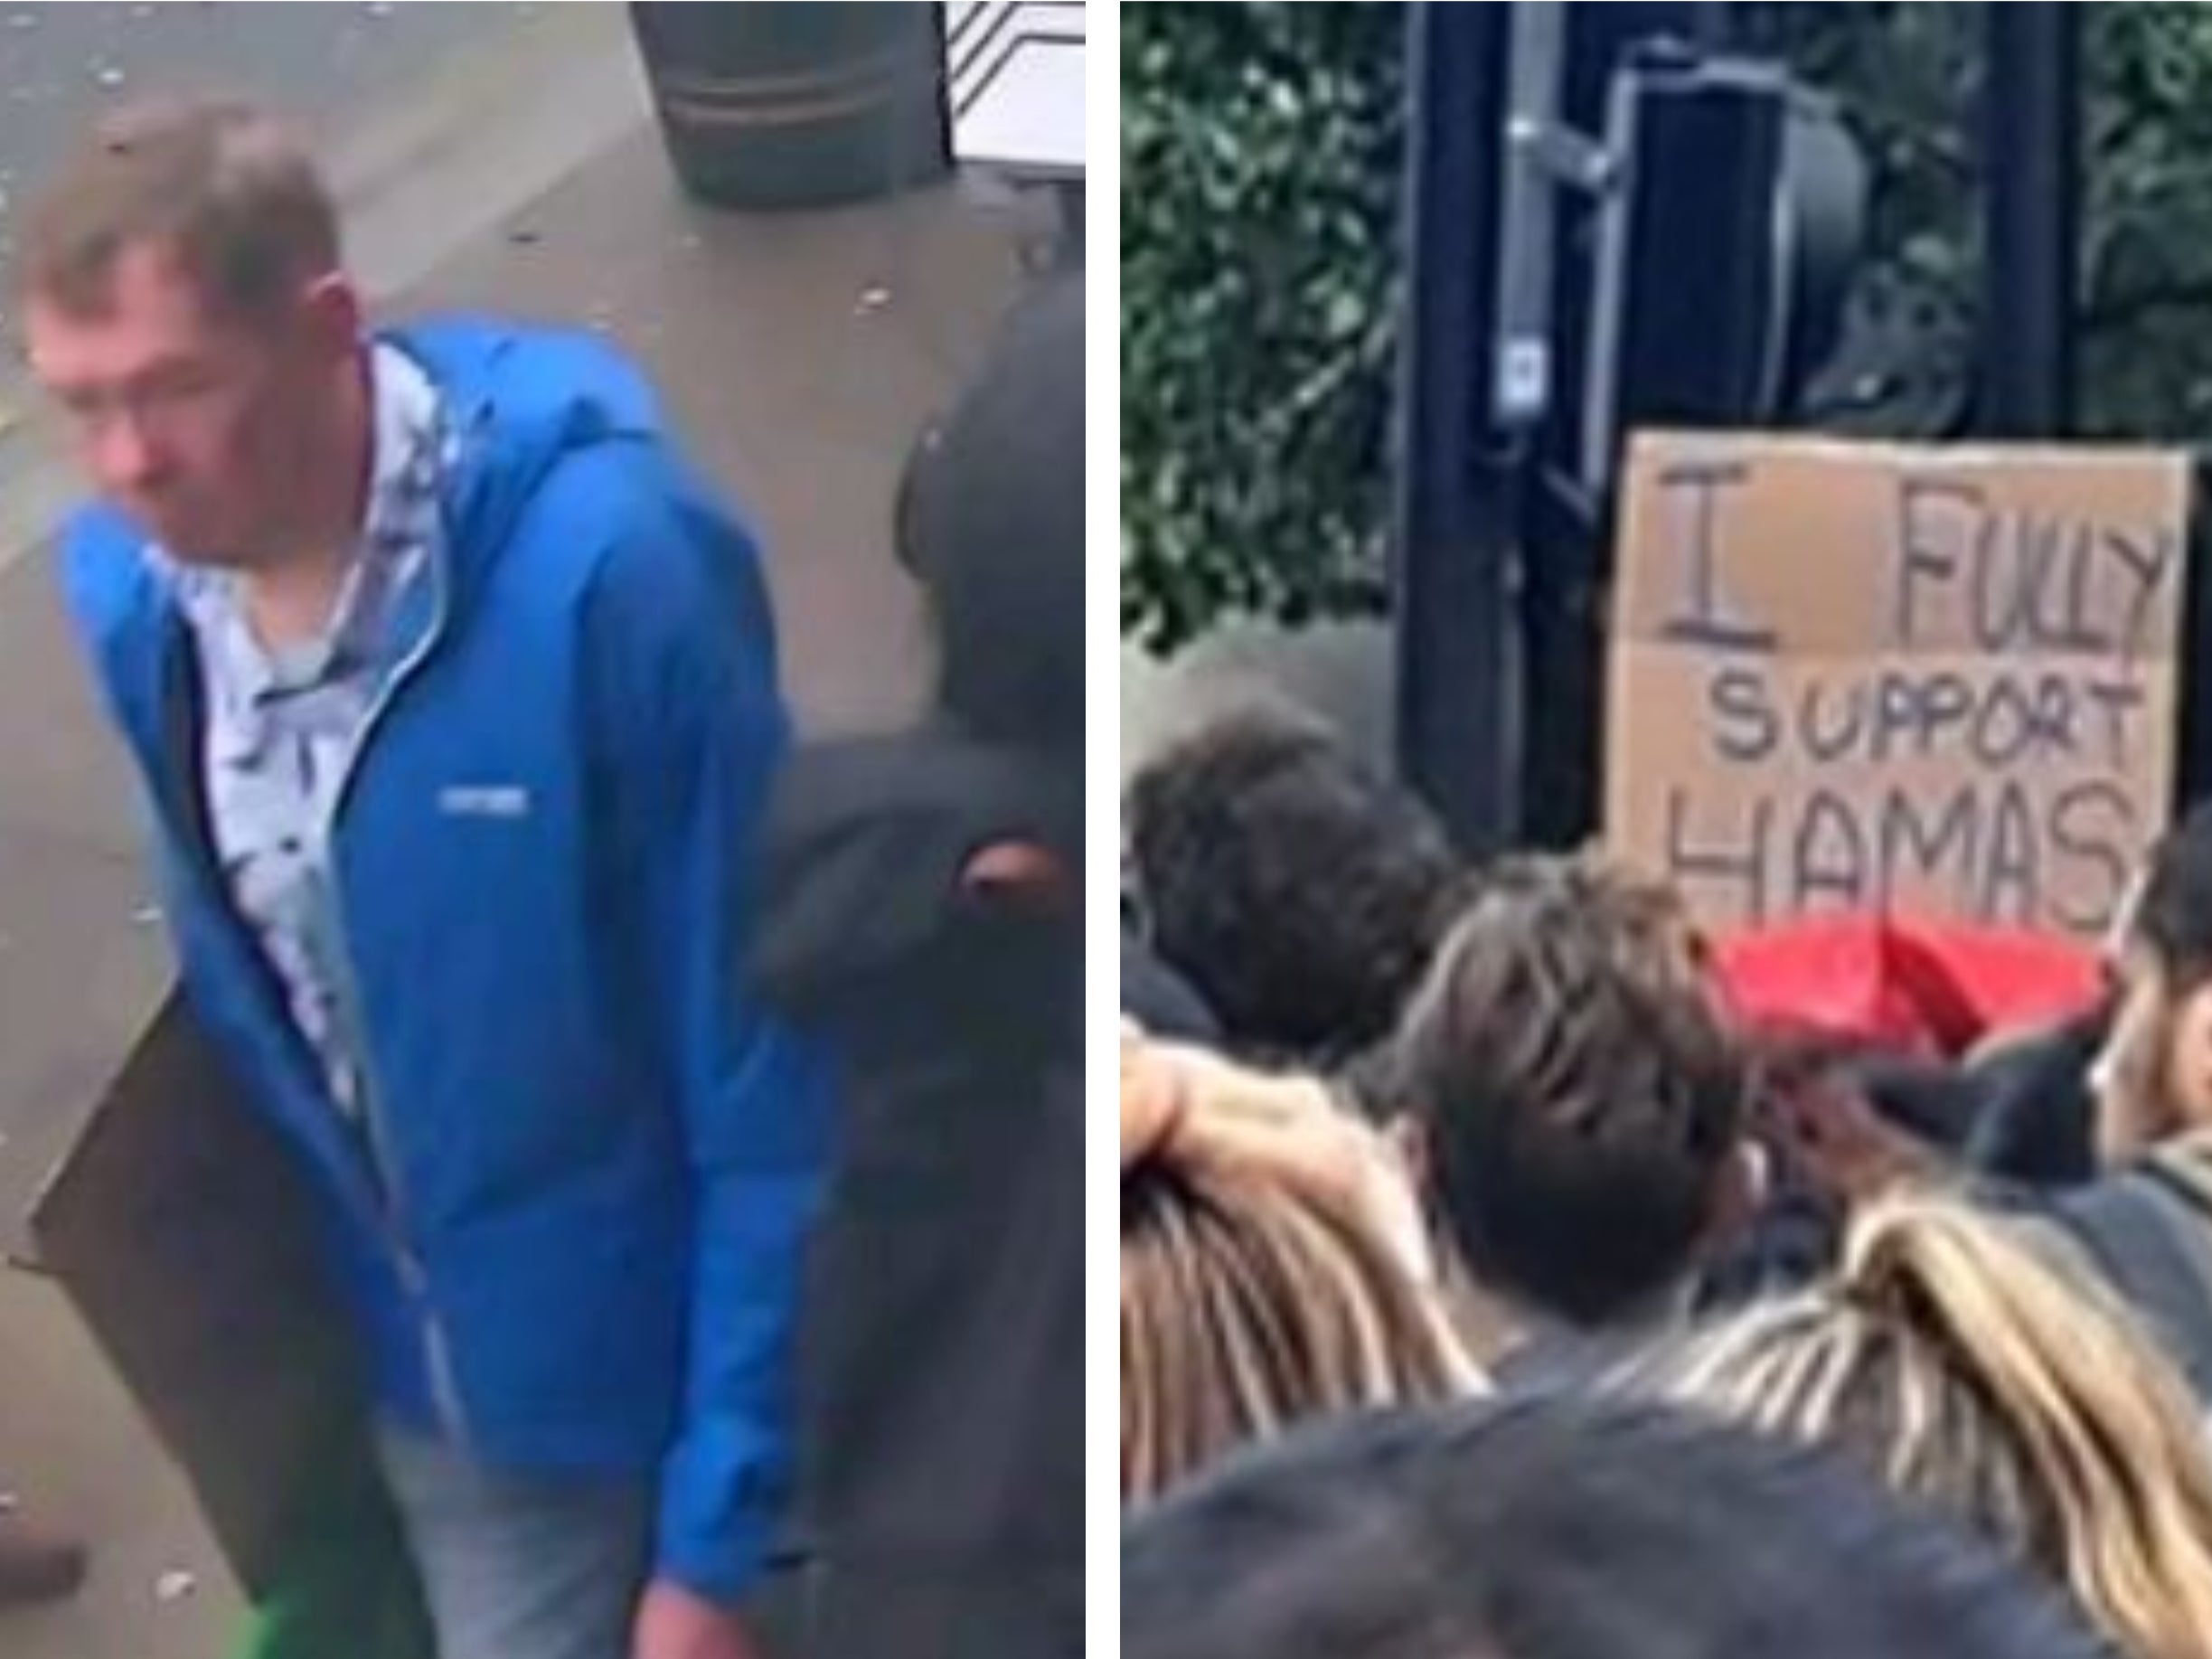 The fourth person was seen at a protest in Bond Street on October 21 waving a placard with “I fully support Hamas” on it.